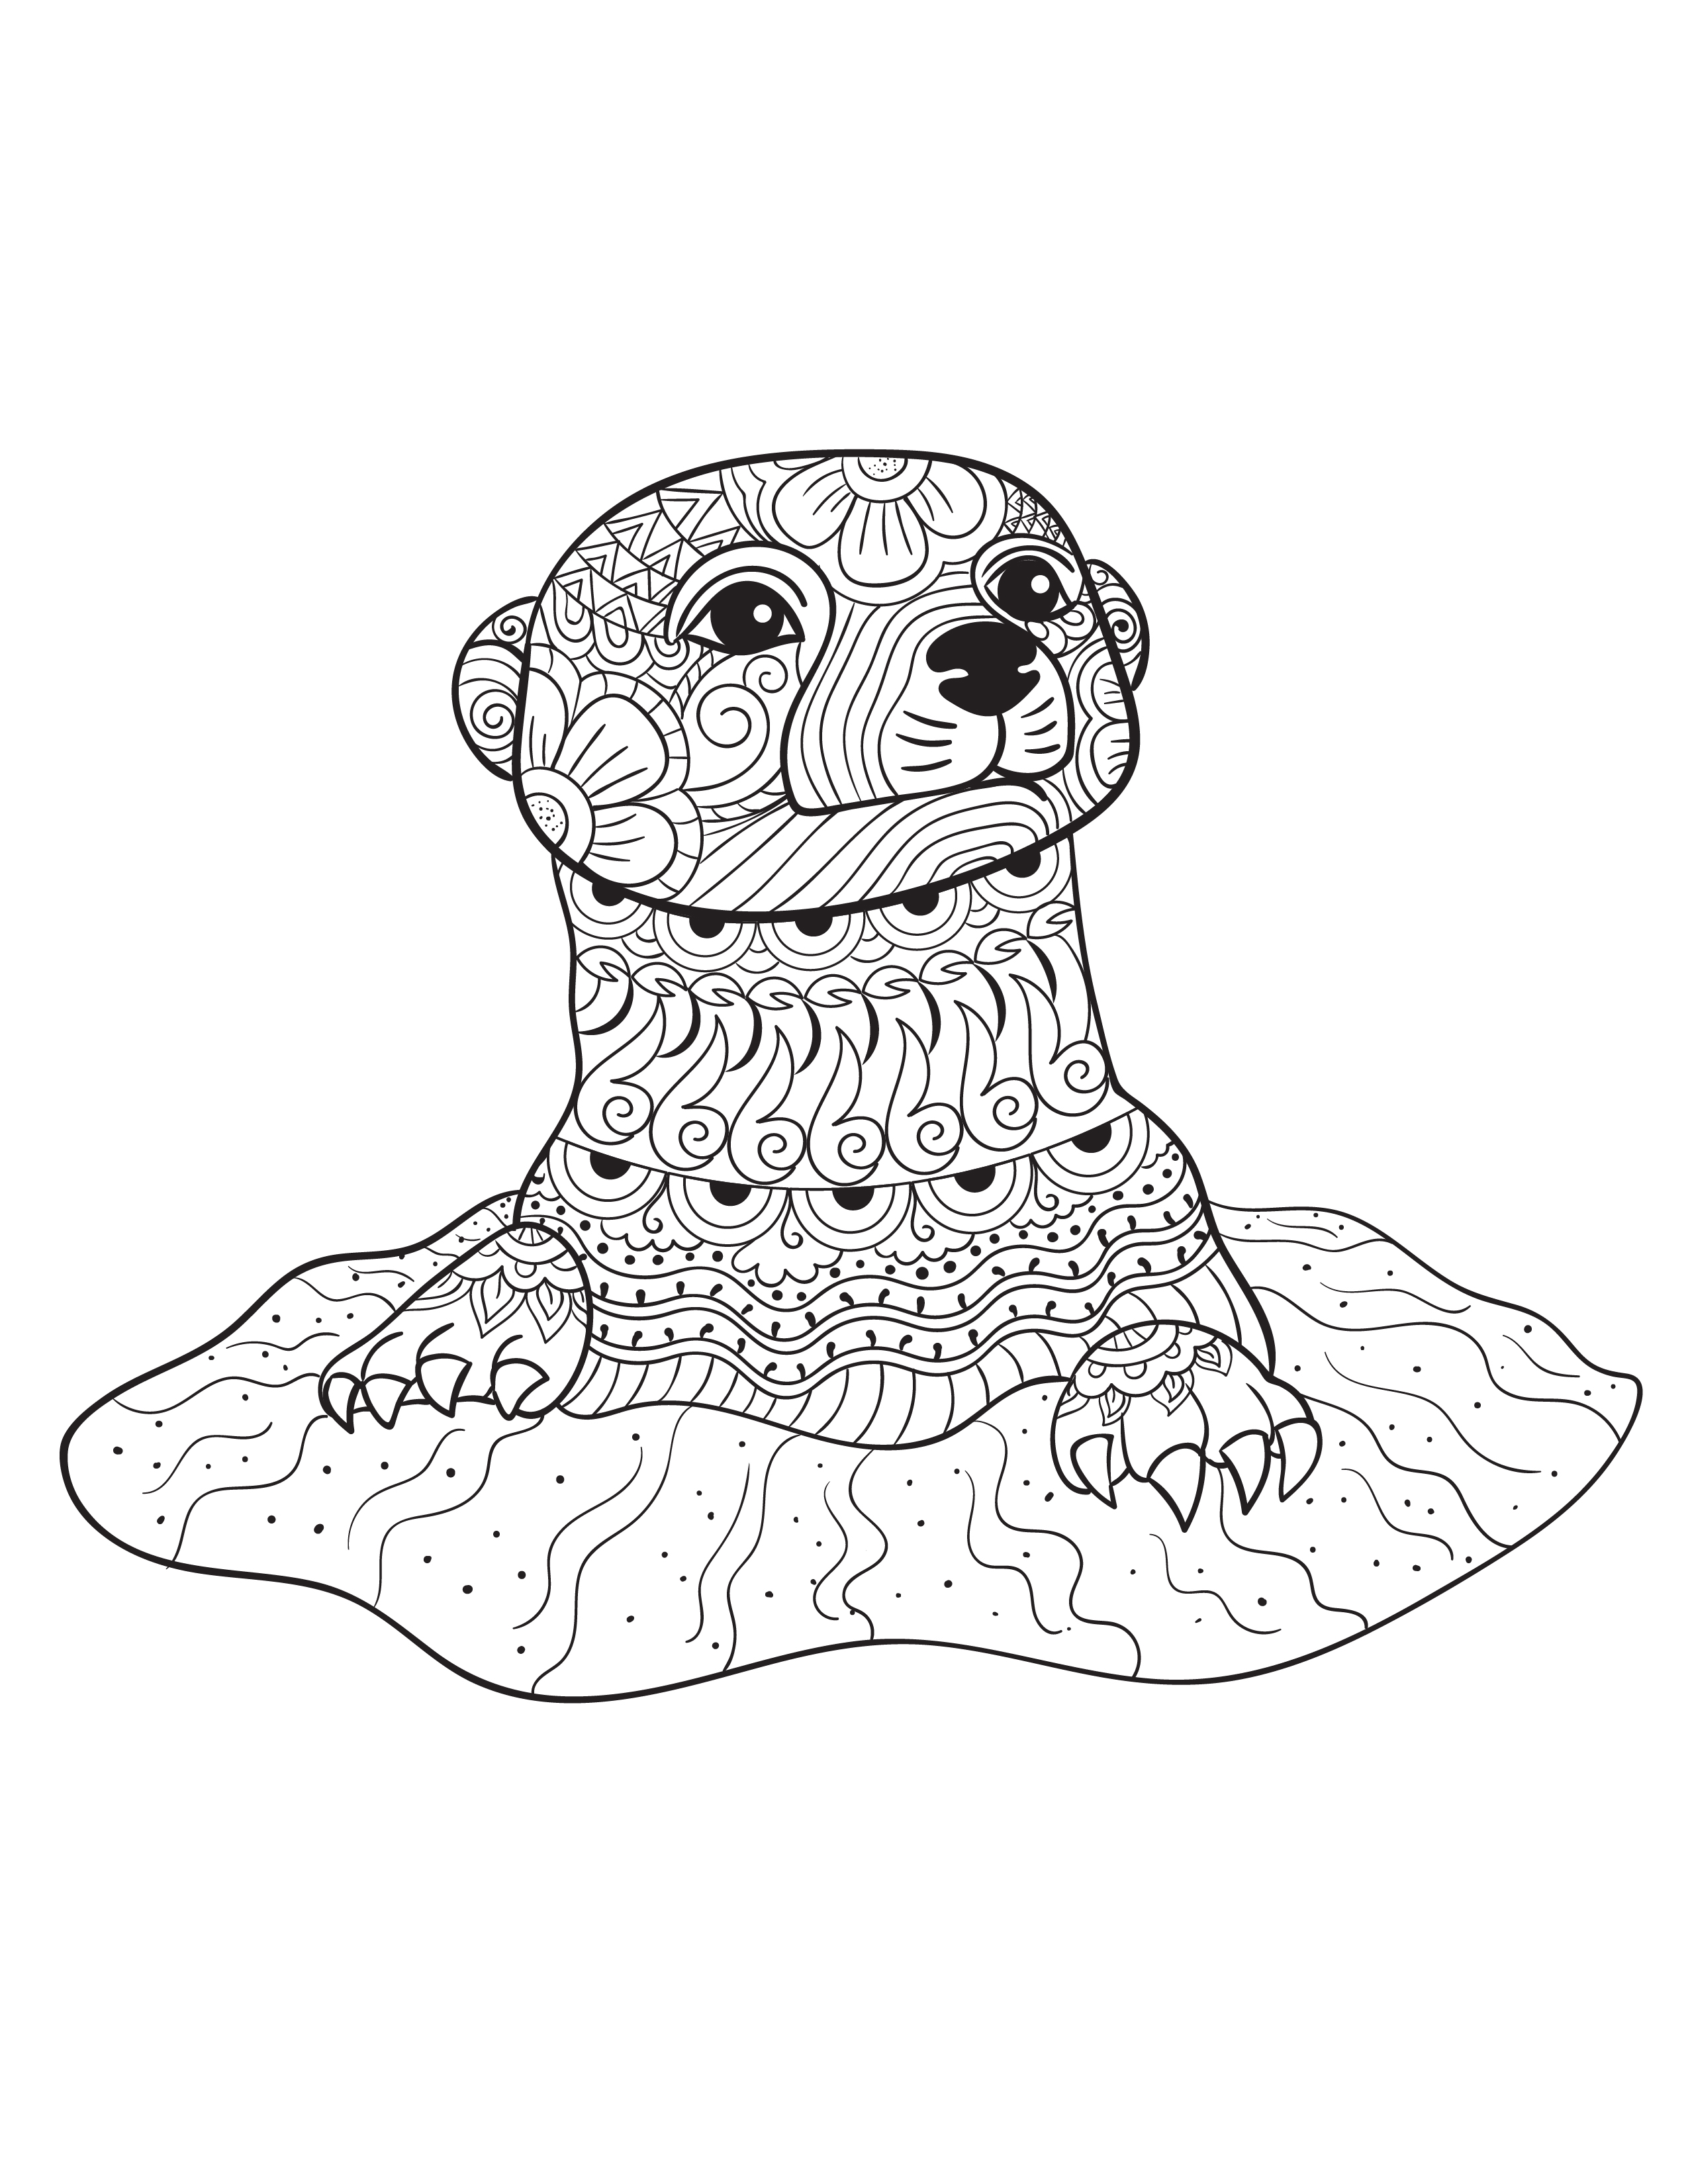 Animal Coloring Pages Printable For Adults   Coloring Home